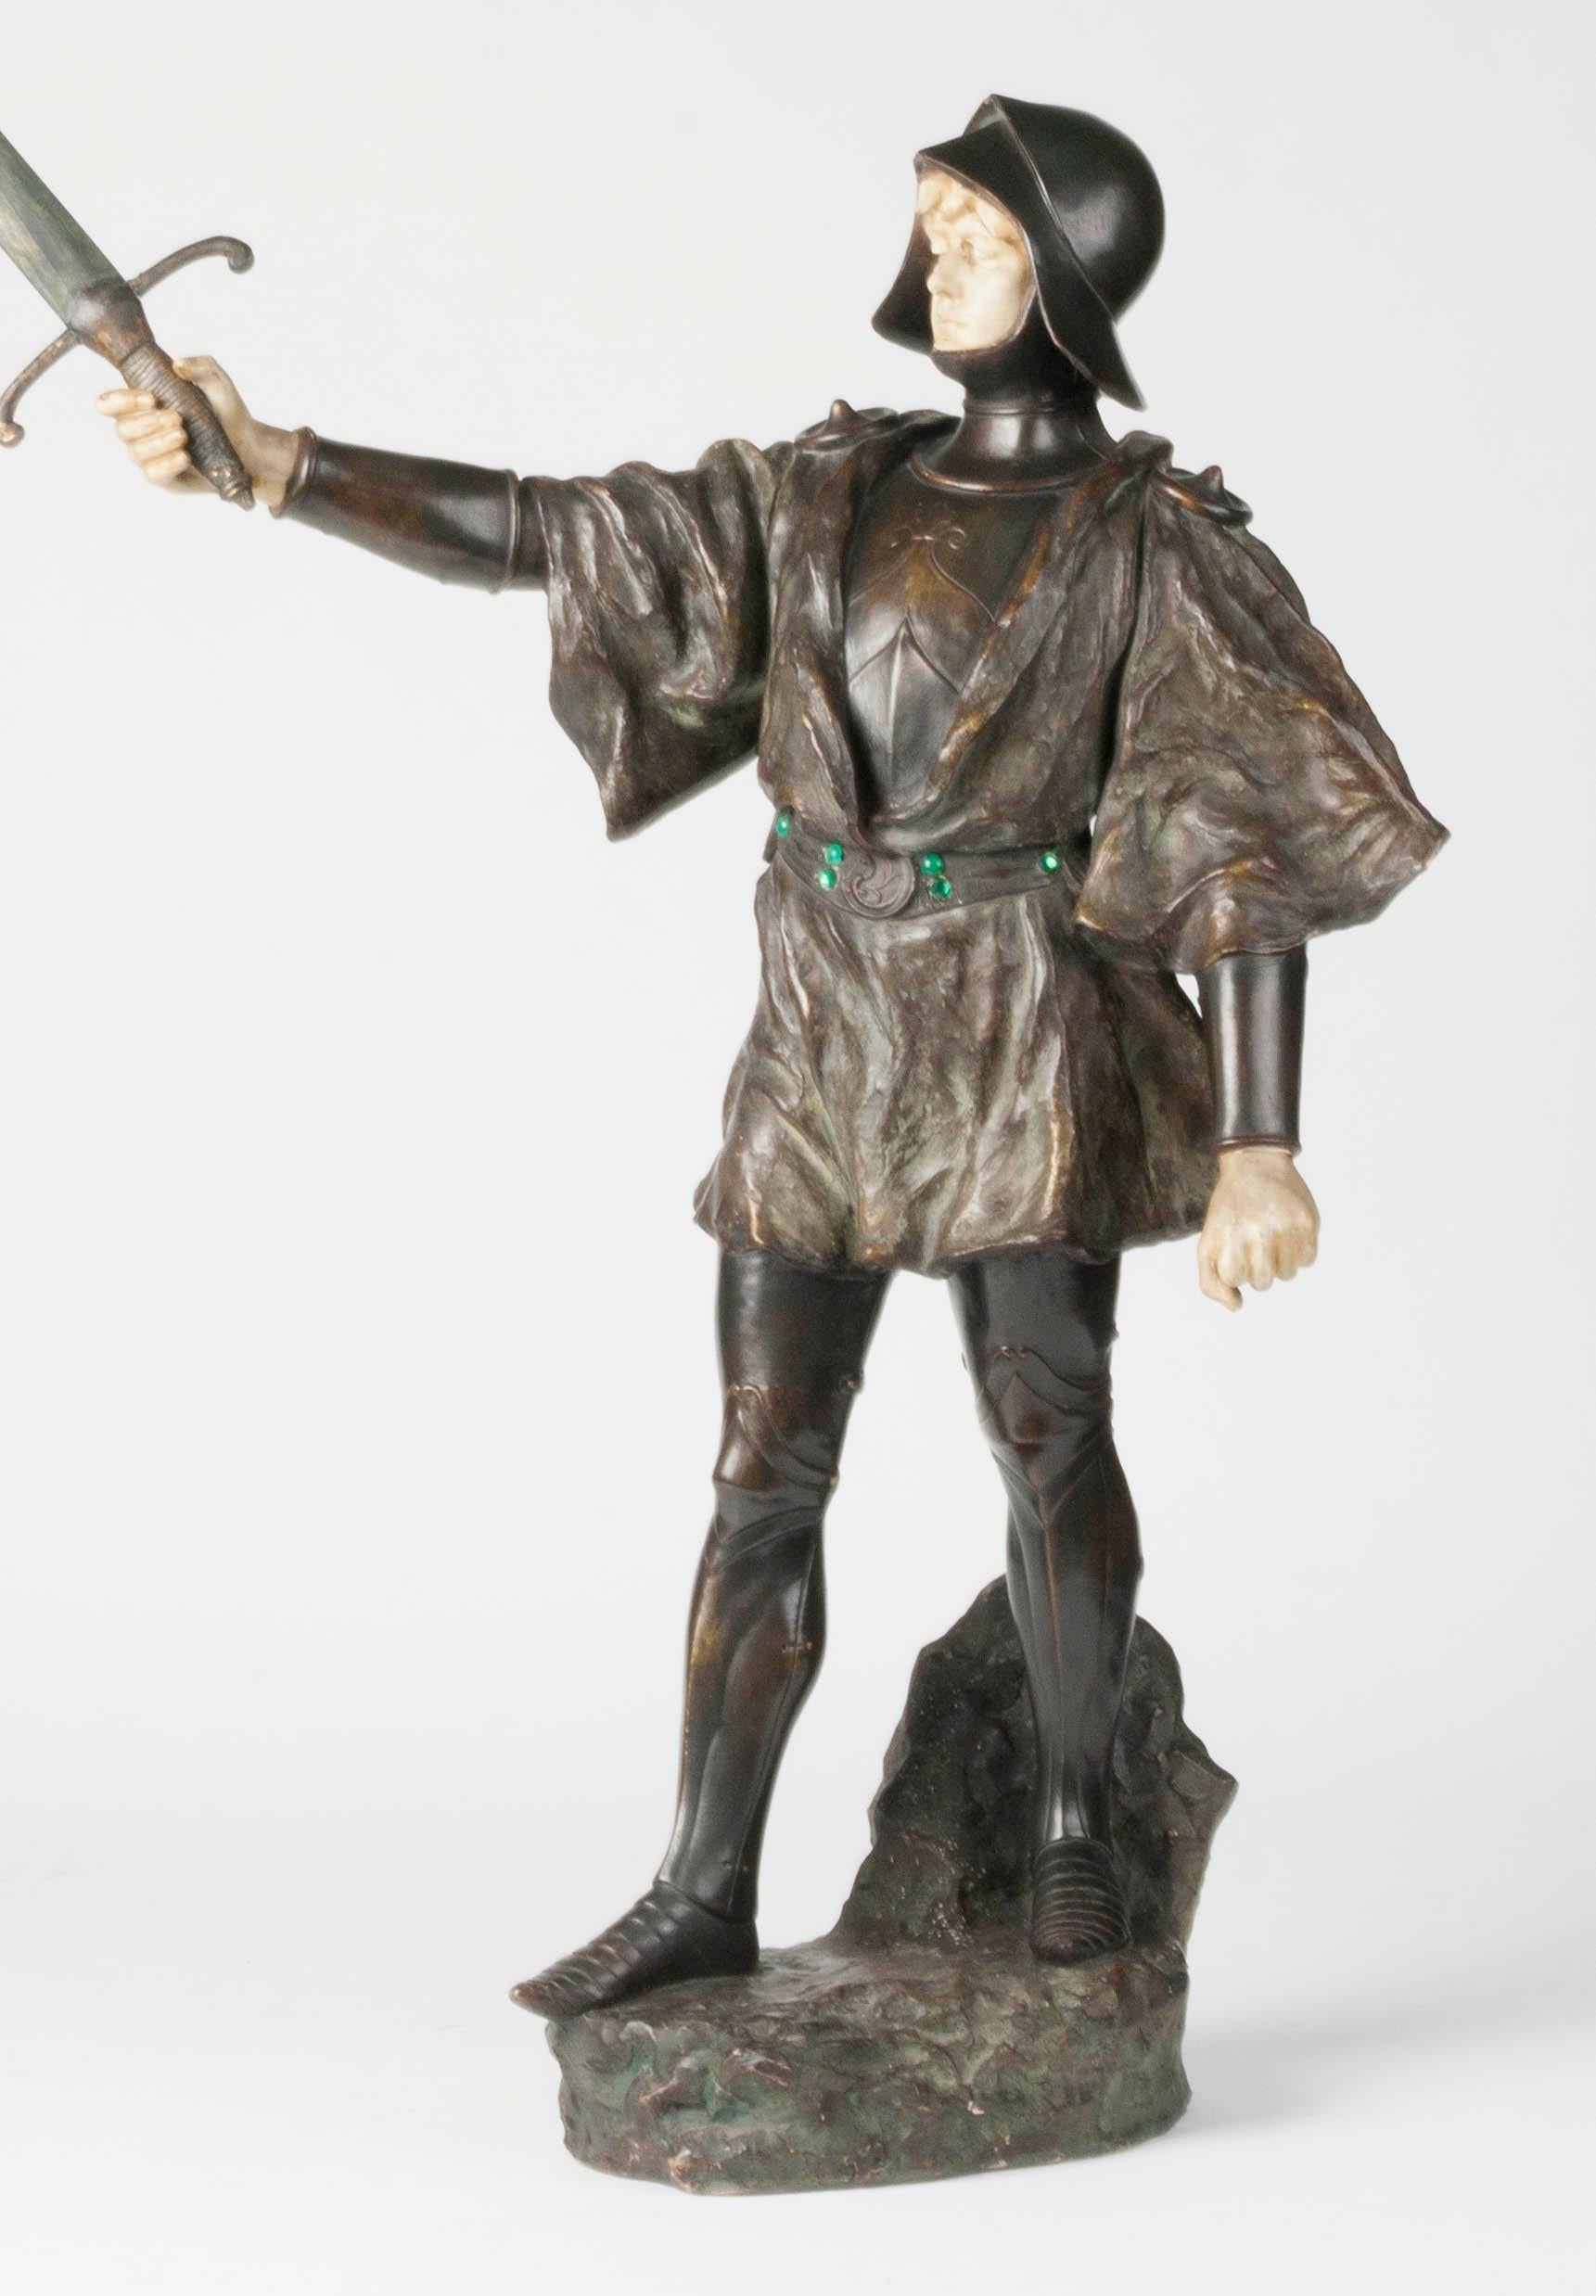 Beautiful terracotta statue of a knight with a sword. The image is signed J. Dupré. The image also has a blind mark that says 'Reproduction Reservée', which can be translated as 'All rights reserved'. The image has a beautiful, powerful appearance.